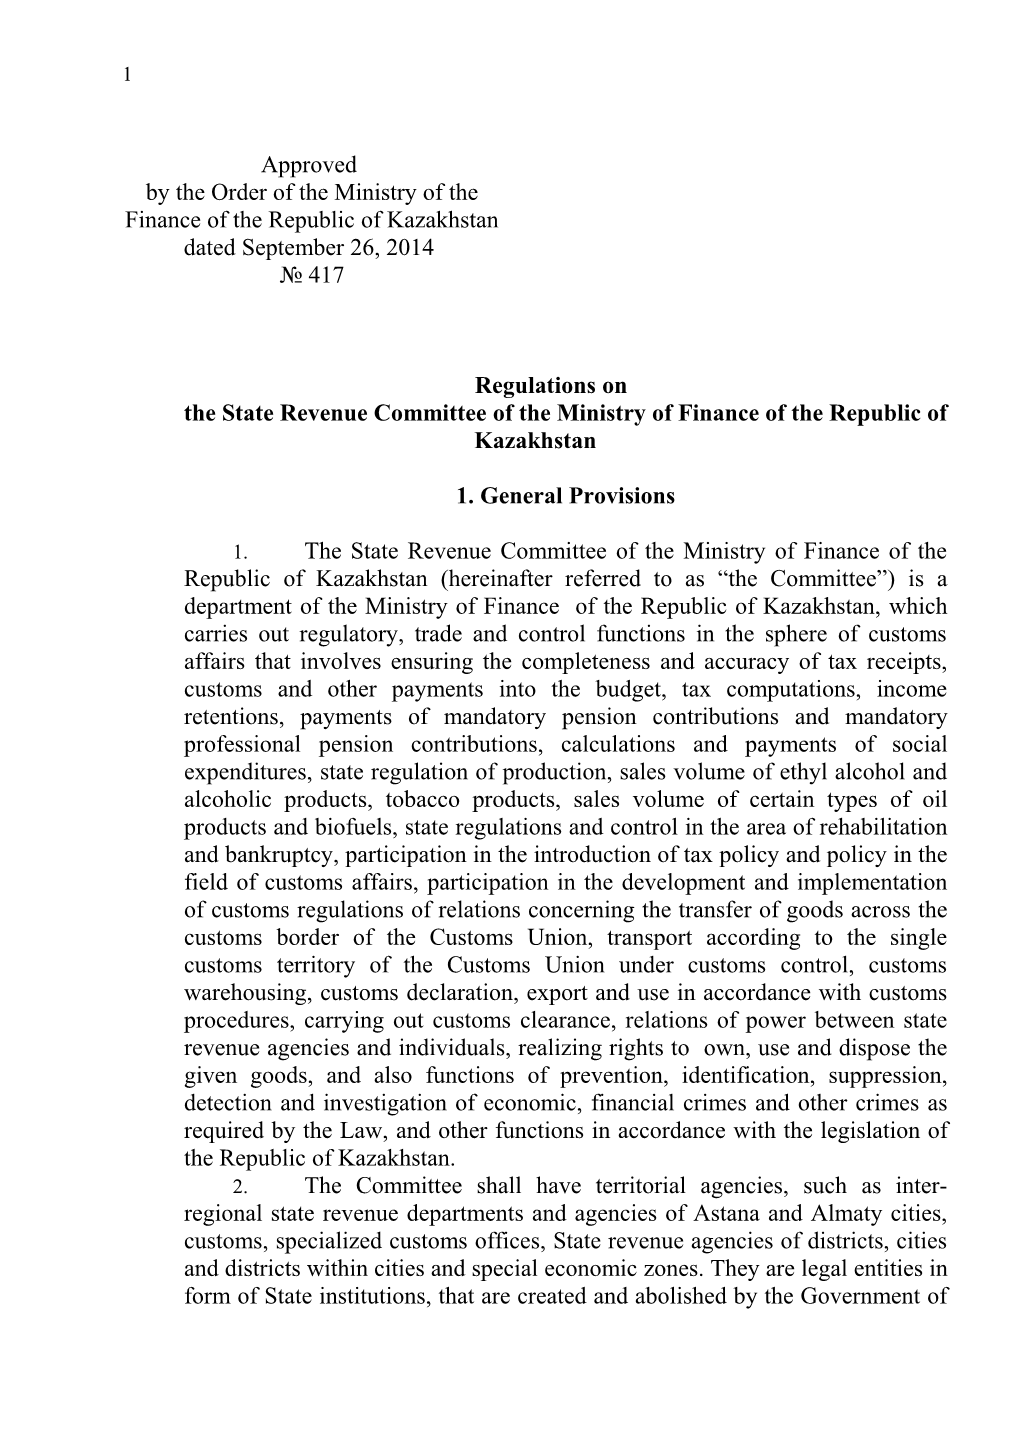 Thestate Revenue Committee of the Ministry of Finance of the Republic of Kazakhstan